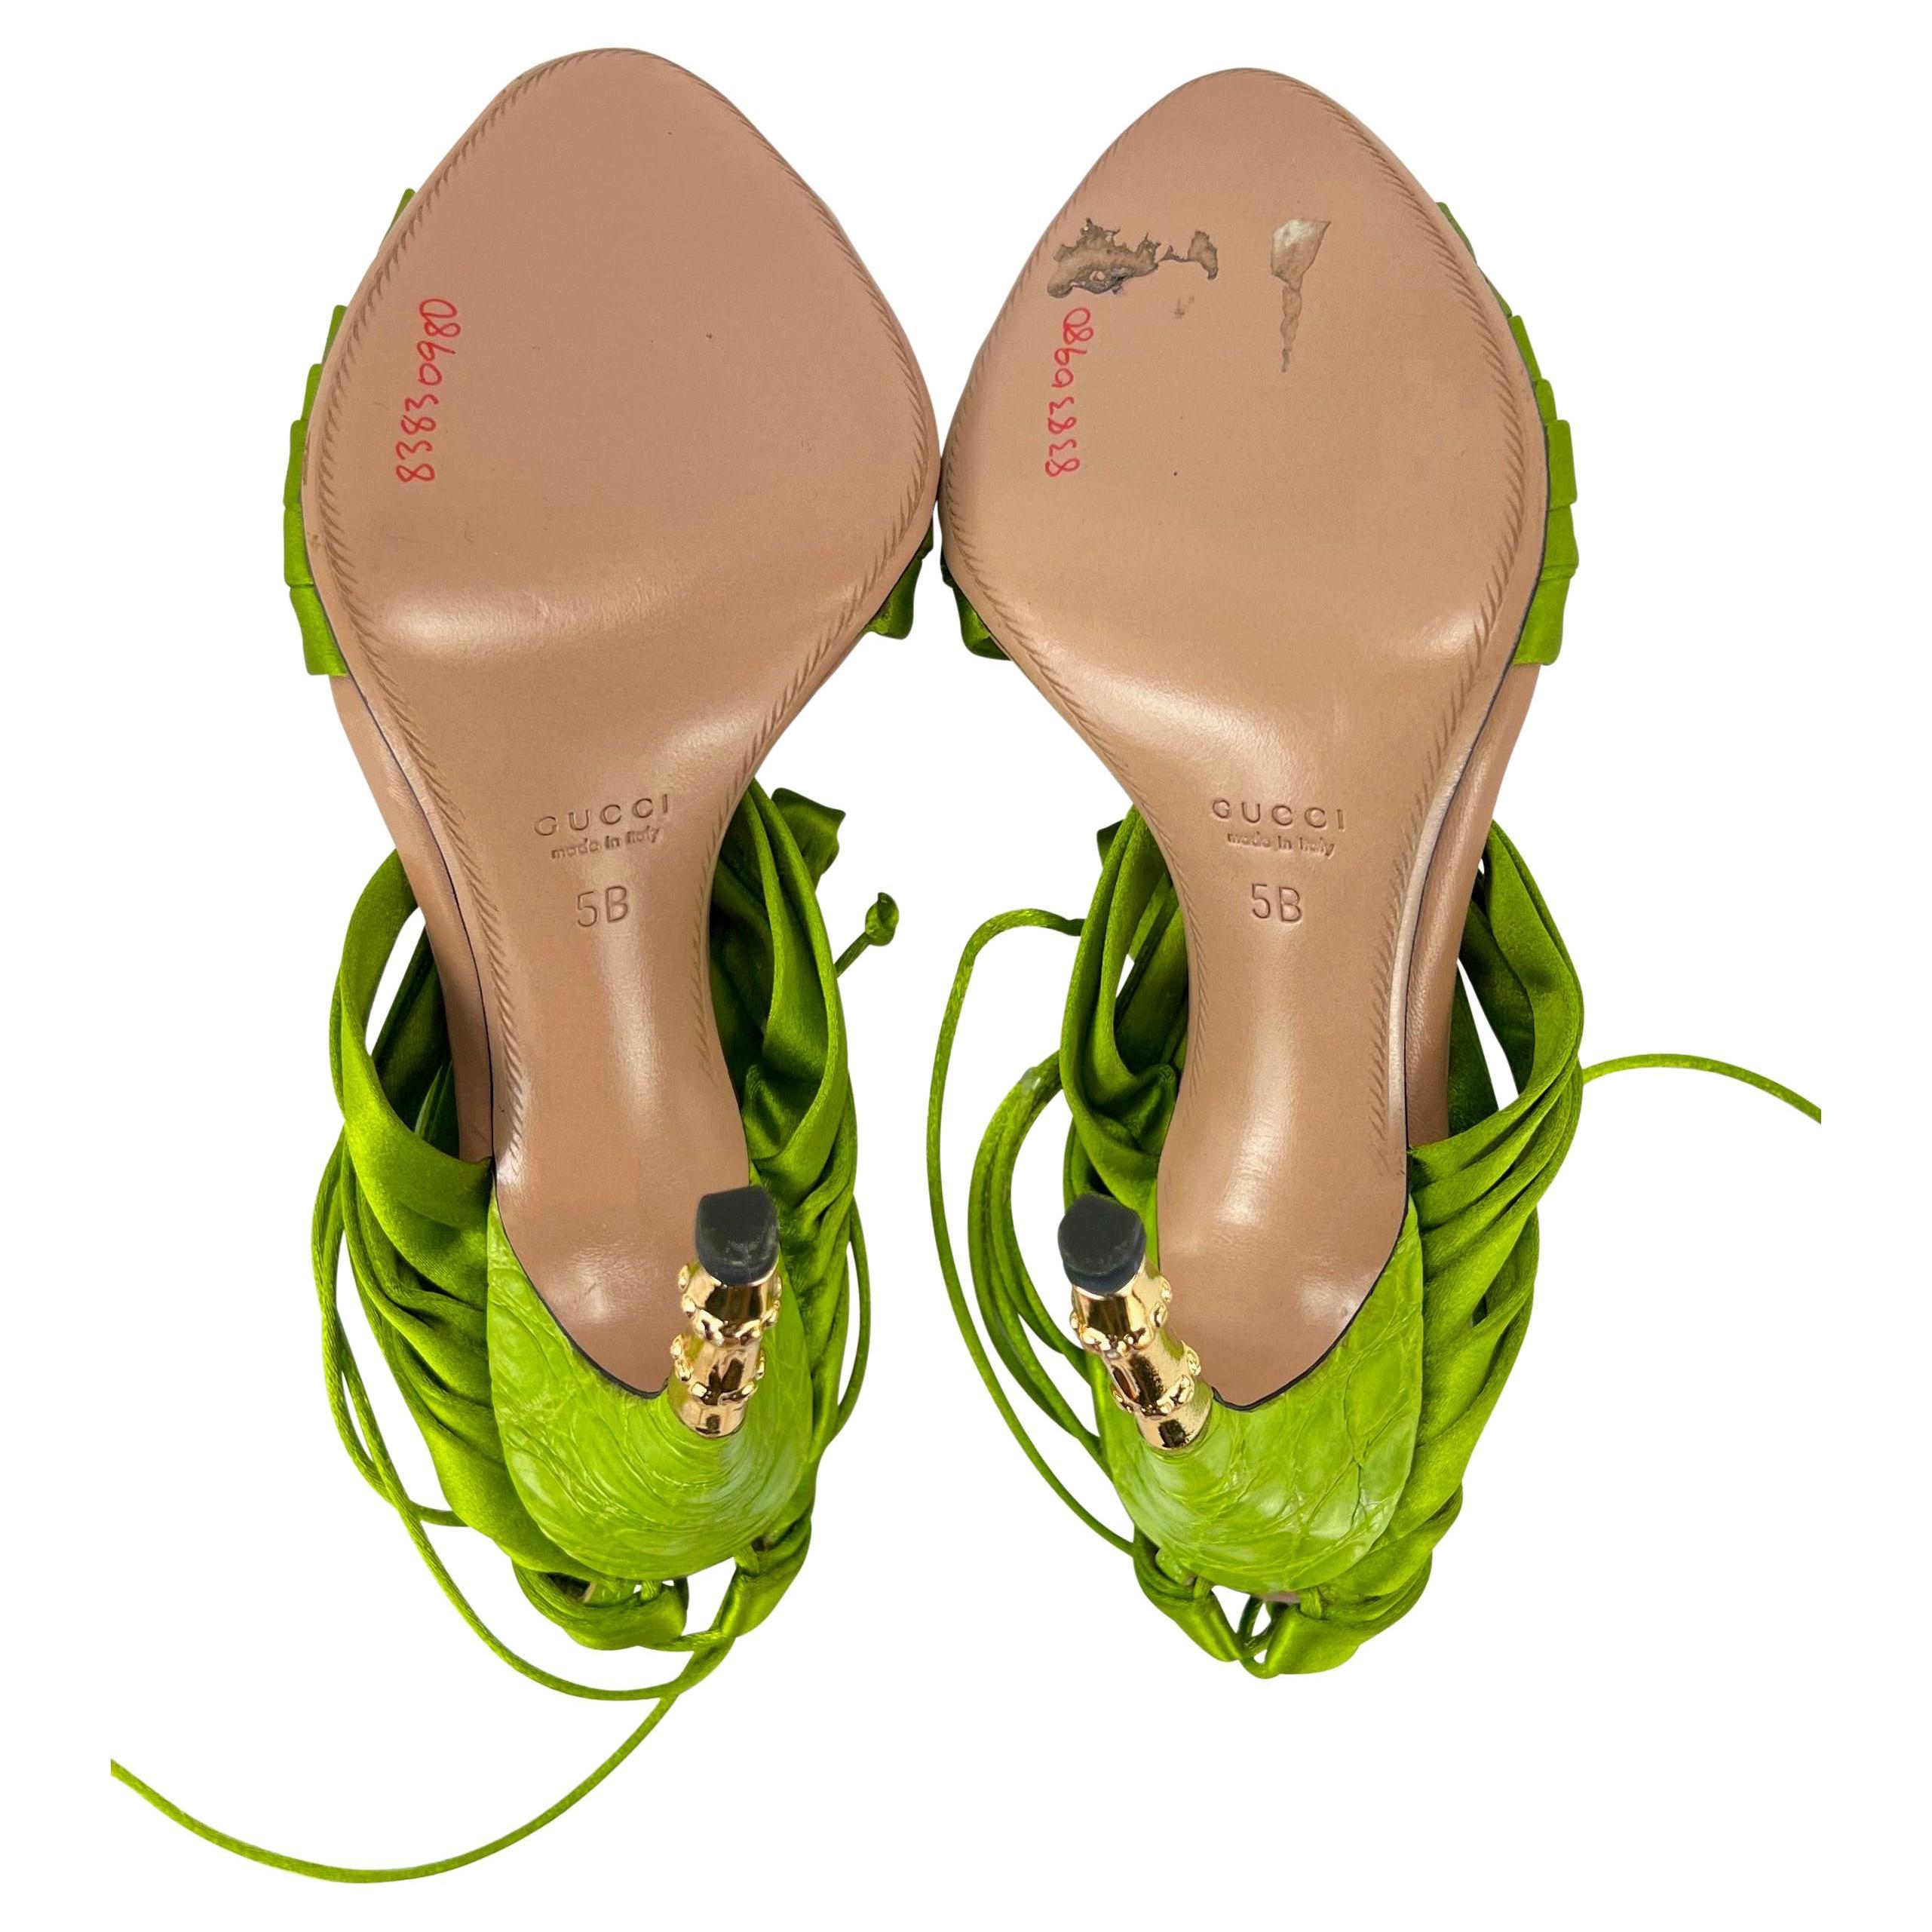 S/S 2004 Gucci by Tom Ford Ad Green Satin Strap Lace-Up Crocodile Heels Size 5 B For Sale 4